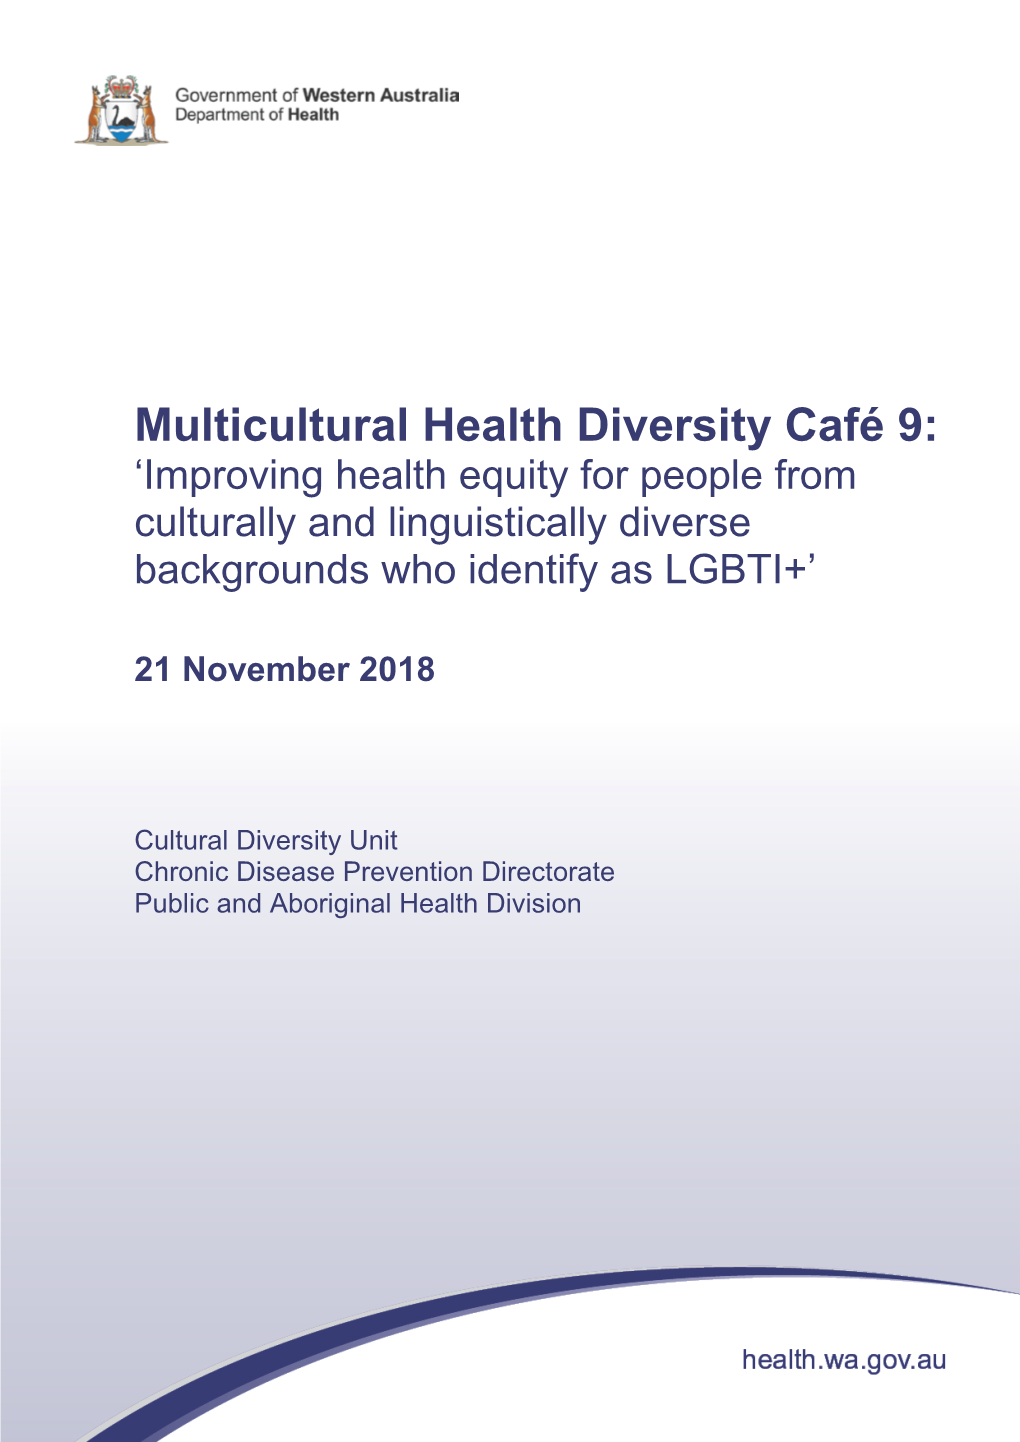 Multicultural Health Diversity Café 9: Improving Health Equity for People